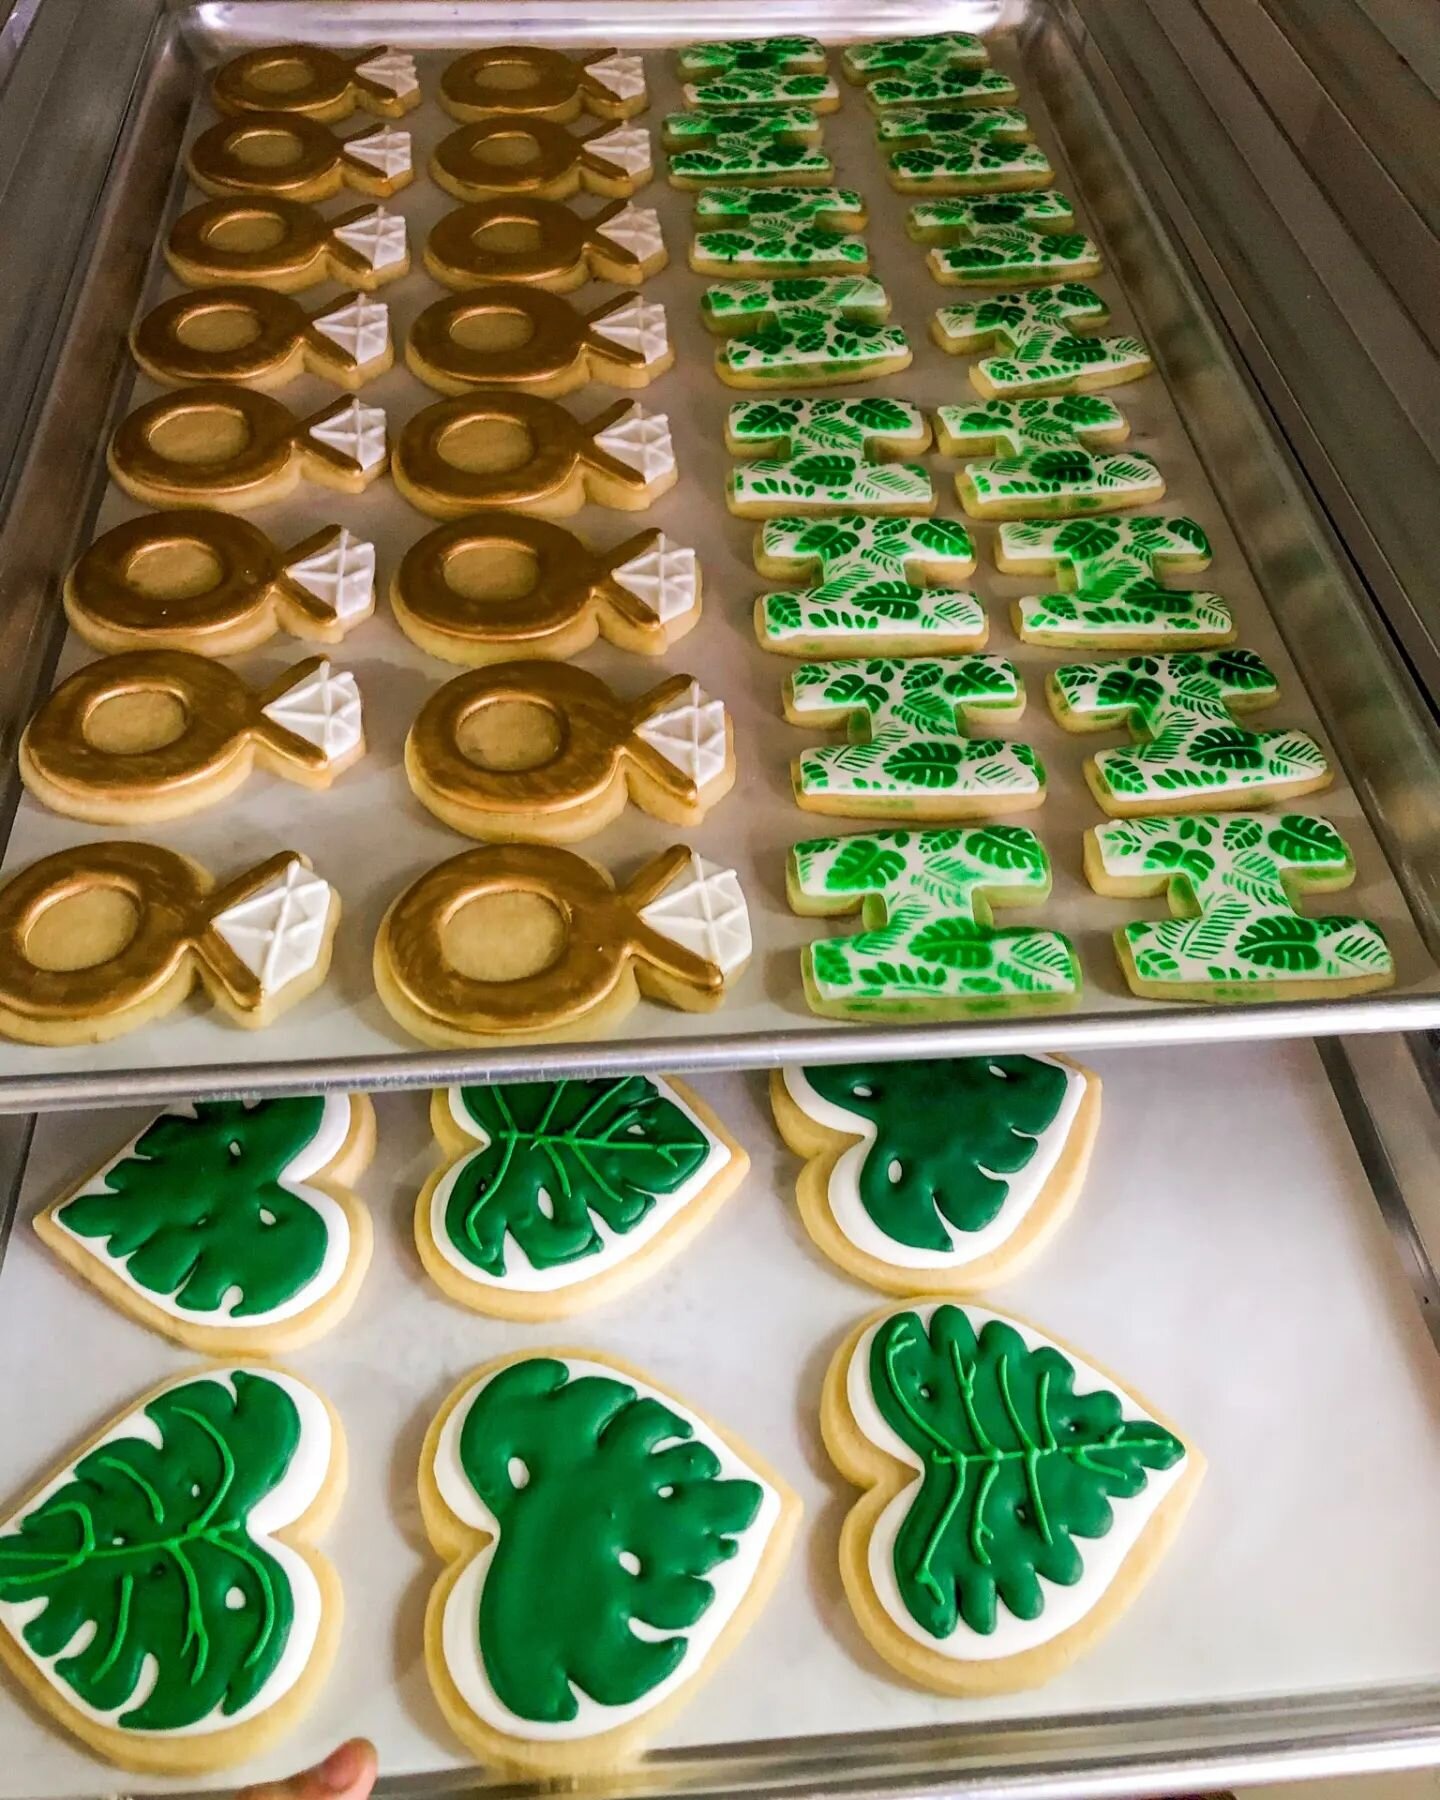 Cookies on Cookies on Cookies.  No matter what the occasion, there is nothing like a good sweet Sugar cookie topped with royal icing.  Whatever your vision is, we can create it! 

#Cookies #jupiterbakers  #jupiterfarms #jupiter #southflorida #bakerso